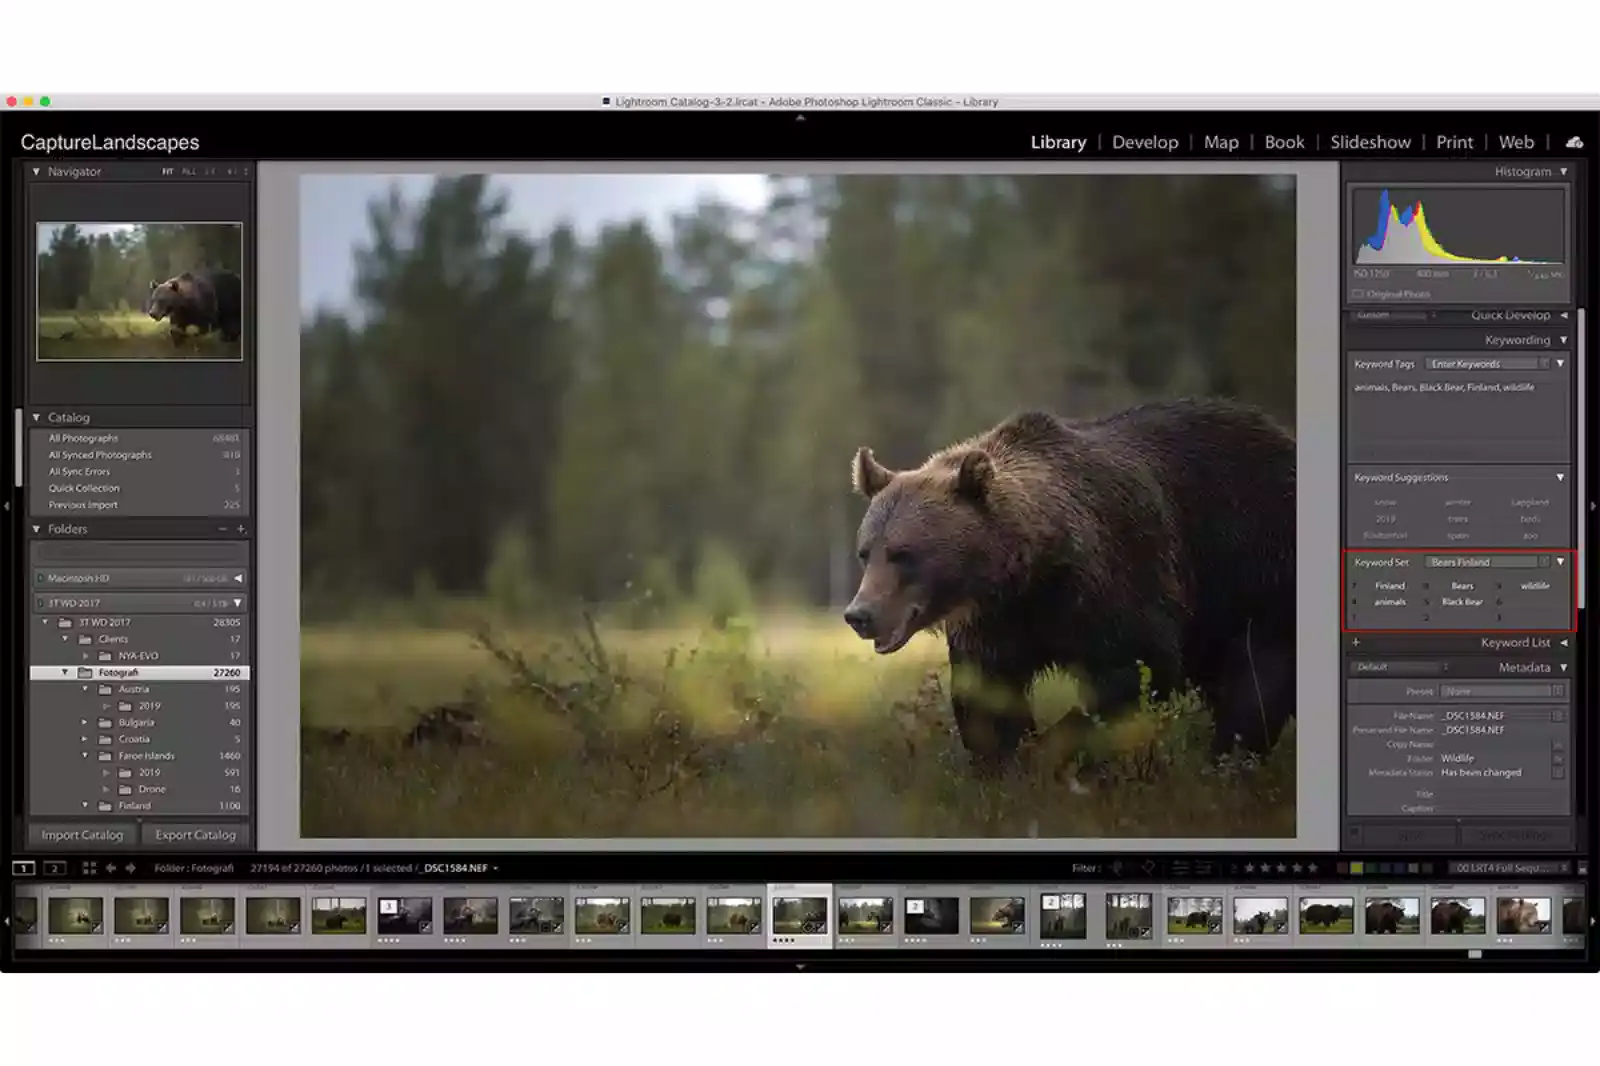 Lightroom Image Editing Features